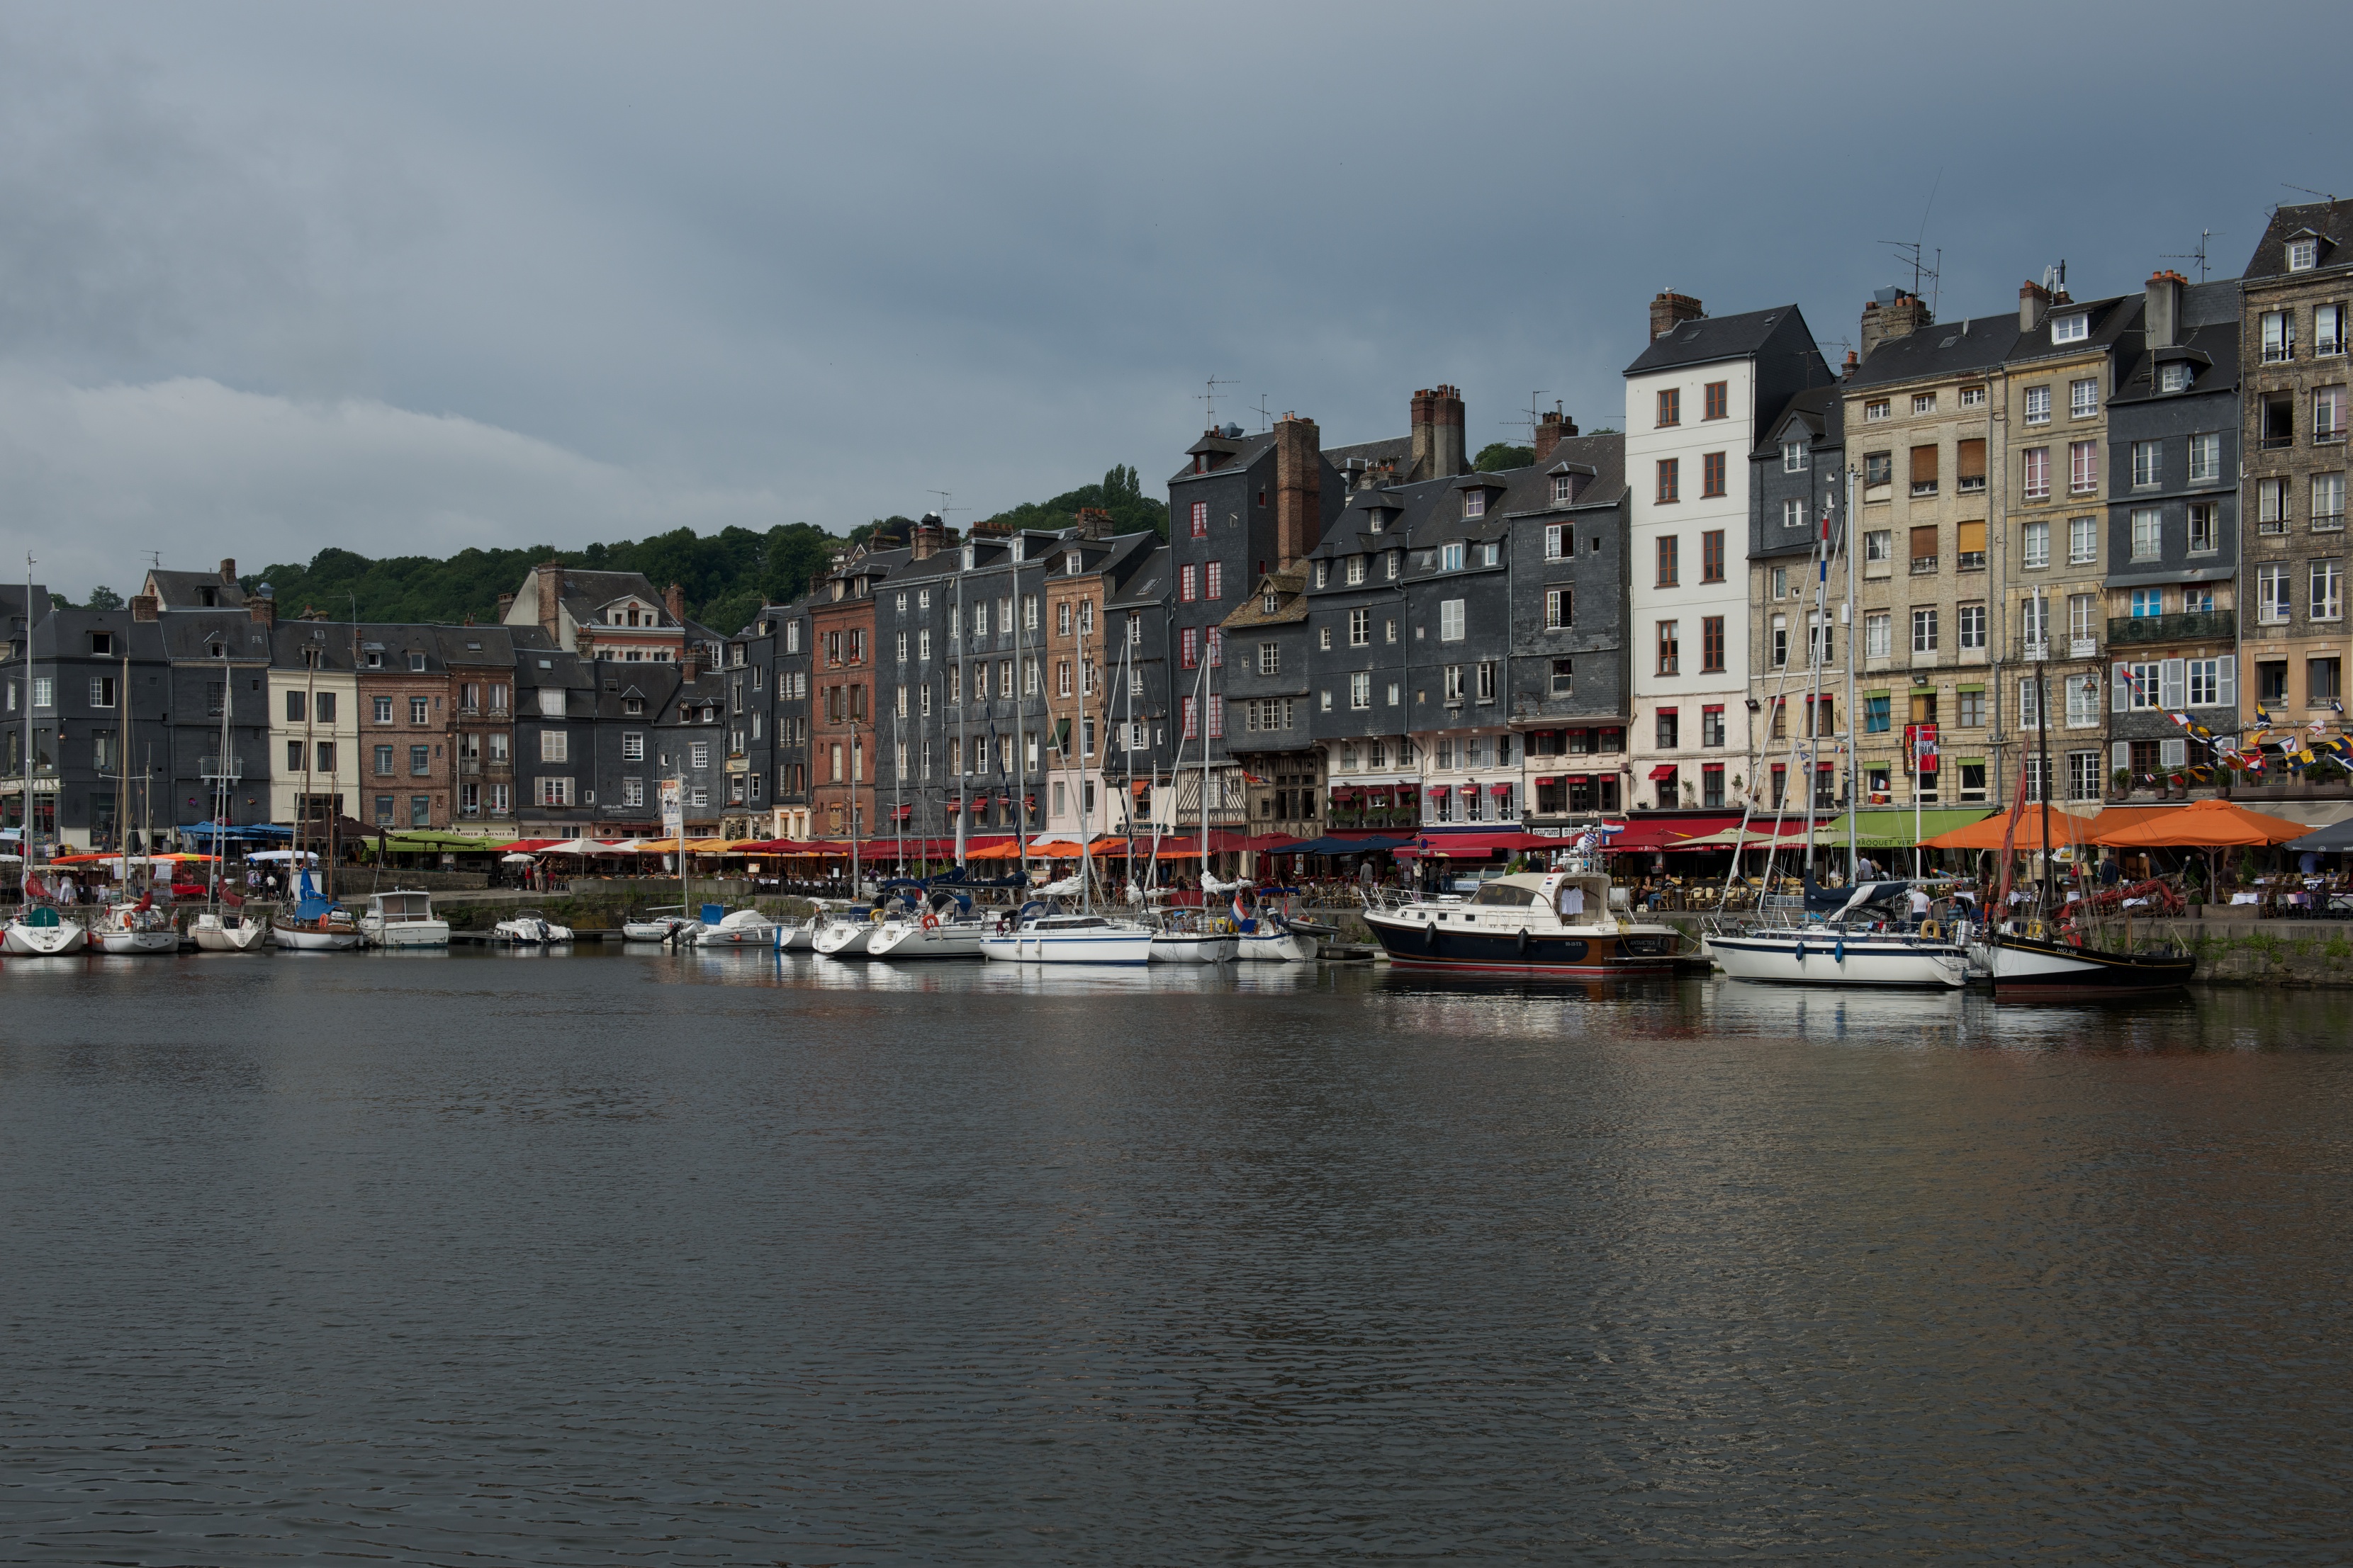 honfleur Marc's Blog – Travel, Food, and Photography